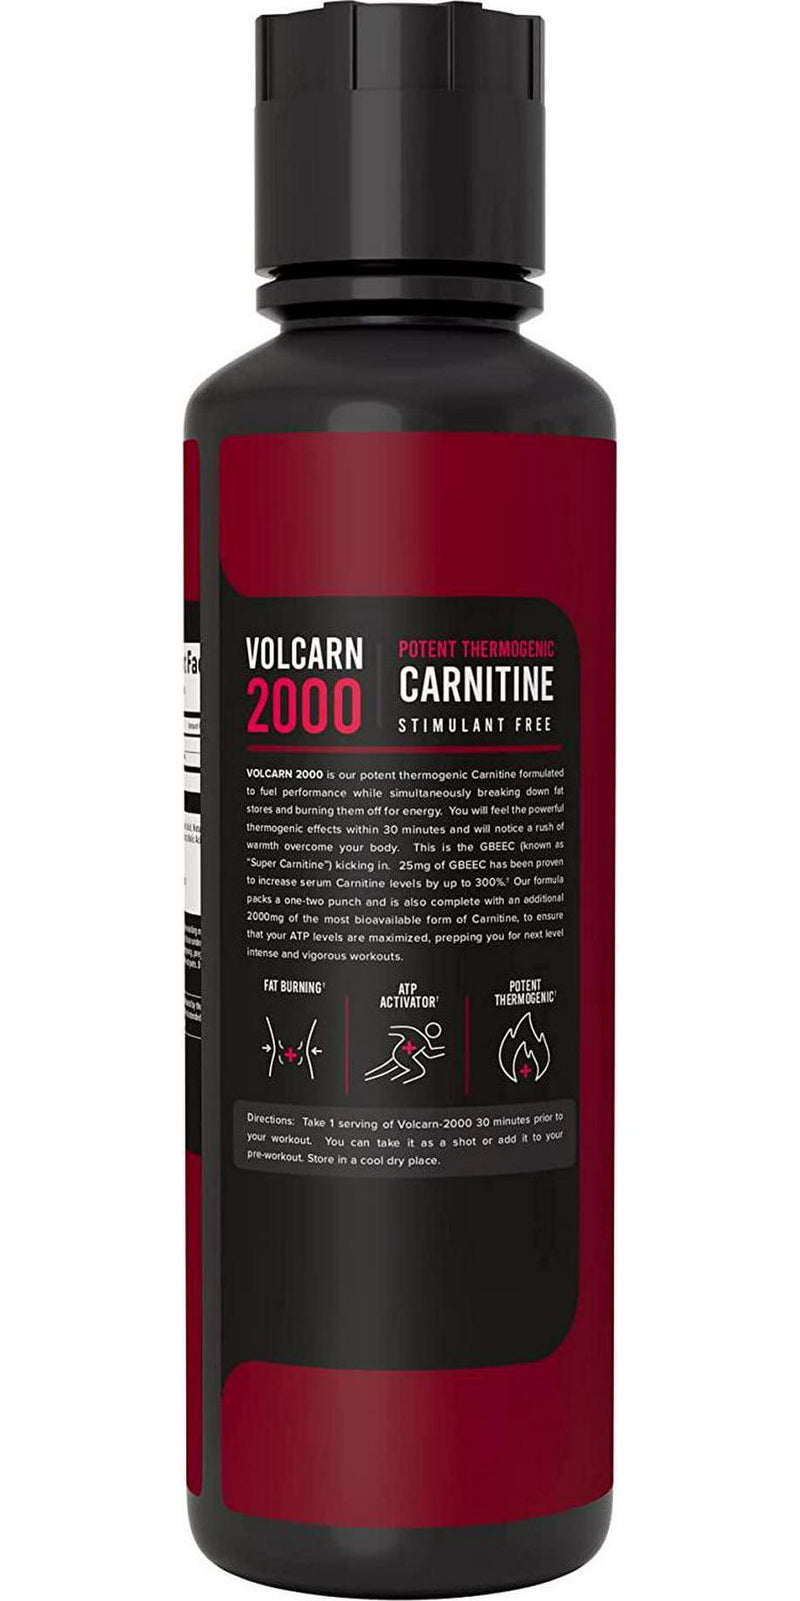 InnoSupps Volcarn 2000 - Liquid L-Carnitine, Boost Energy, Caffeine Free, No Artificial Sweeteners, 32 Servings (Pink Starblast)